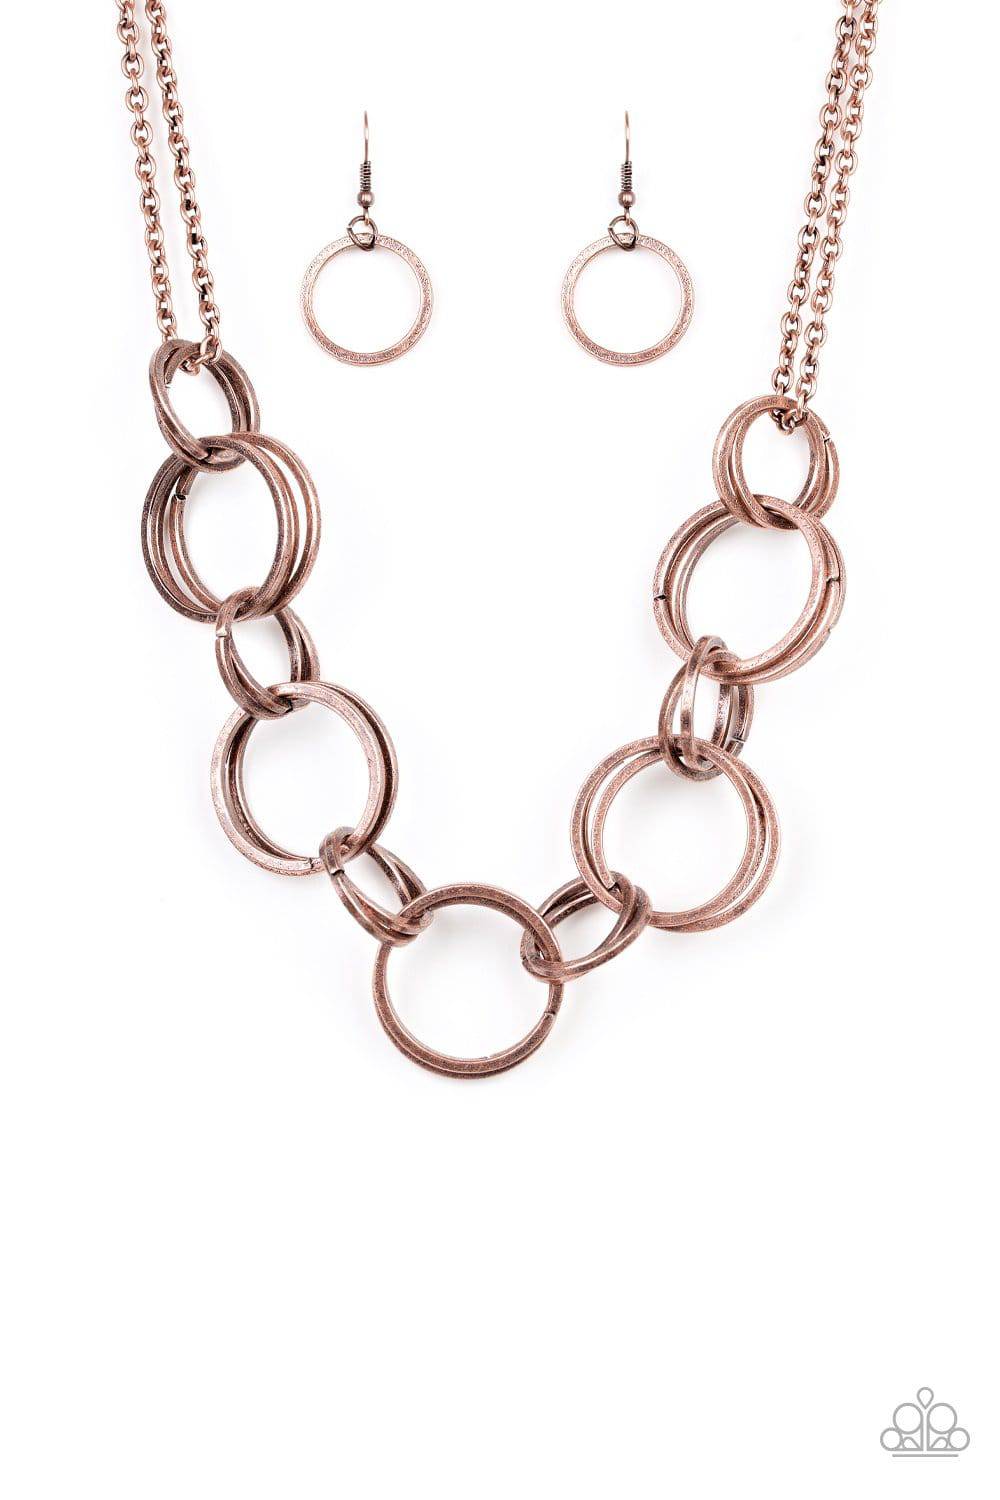 Jump Into The Ring - Copper Necklace - Paparazzi Accessories - GlaMarous Titi Jewels